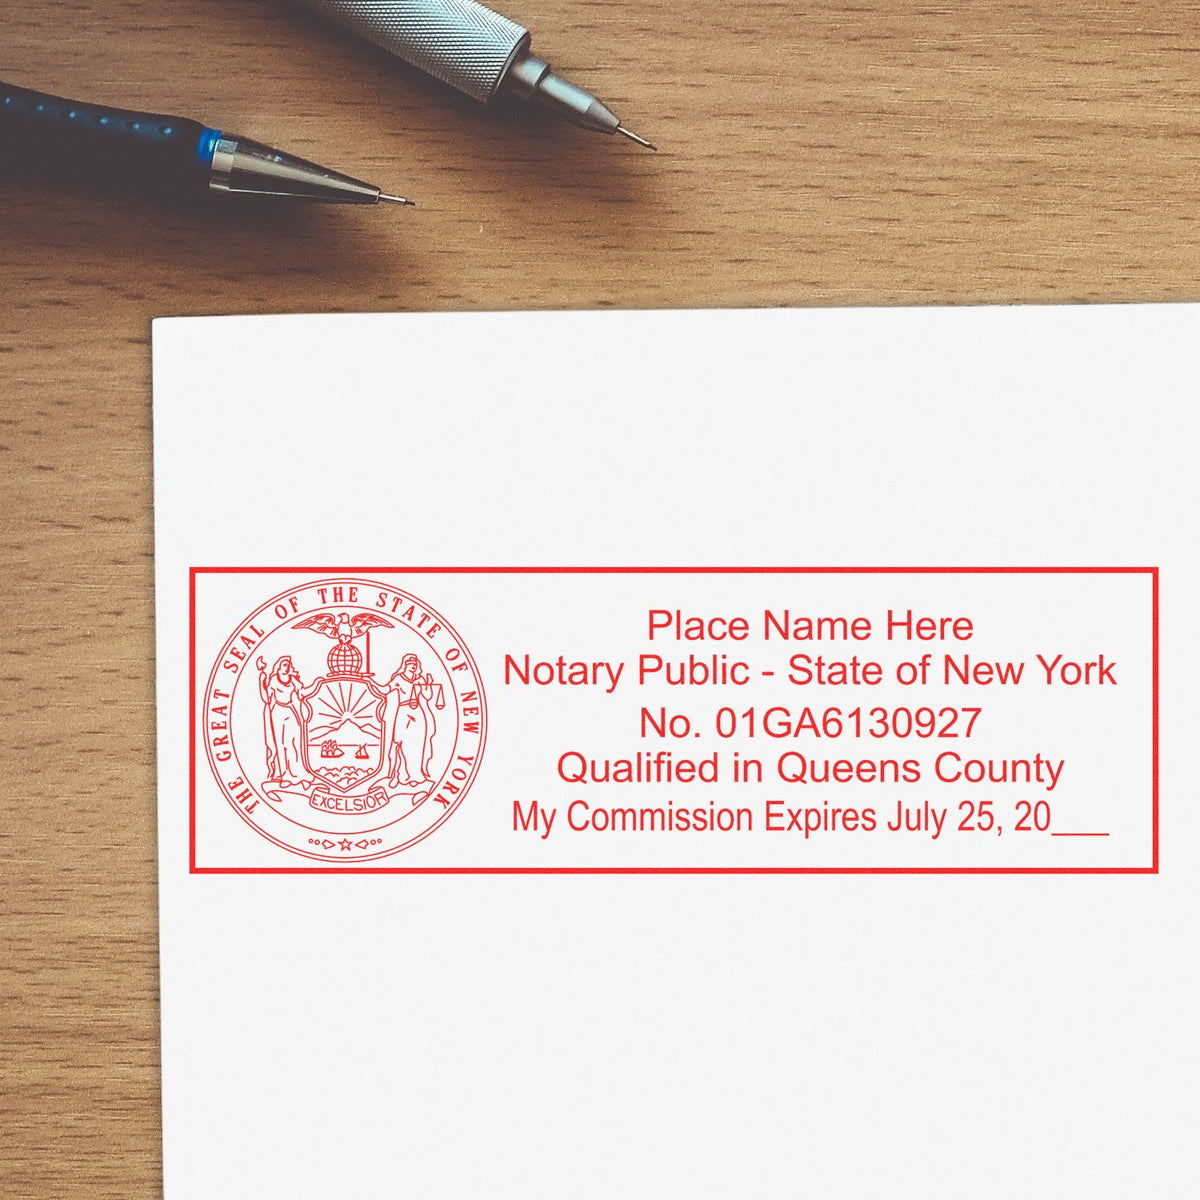 Another Example of a stamped impression of the Super Slim New York Notary Public Stamp on a piece of office paper.